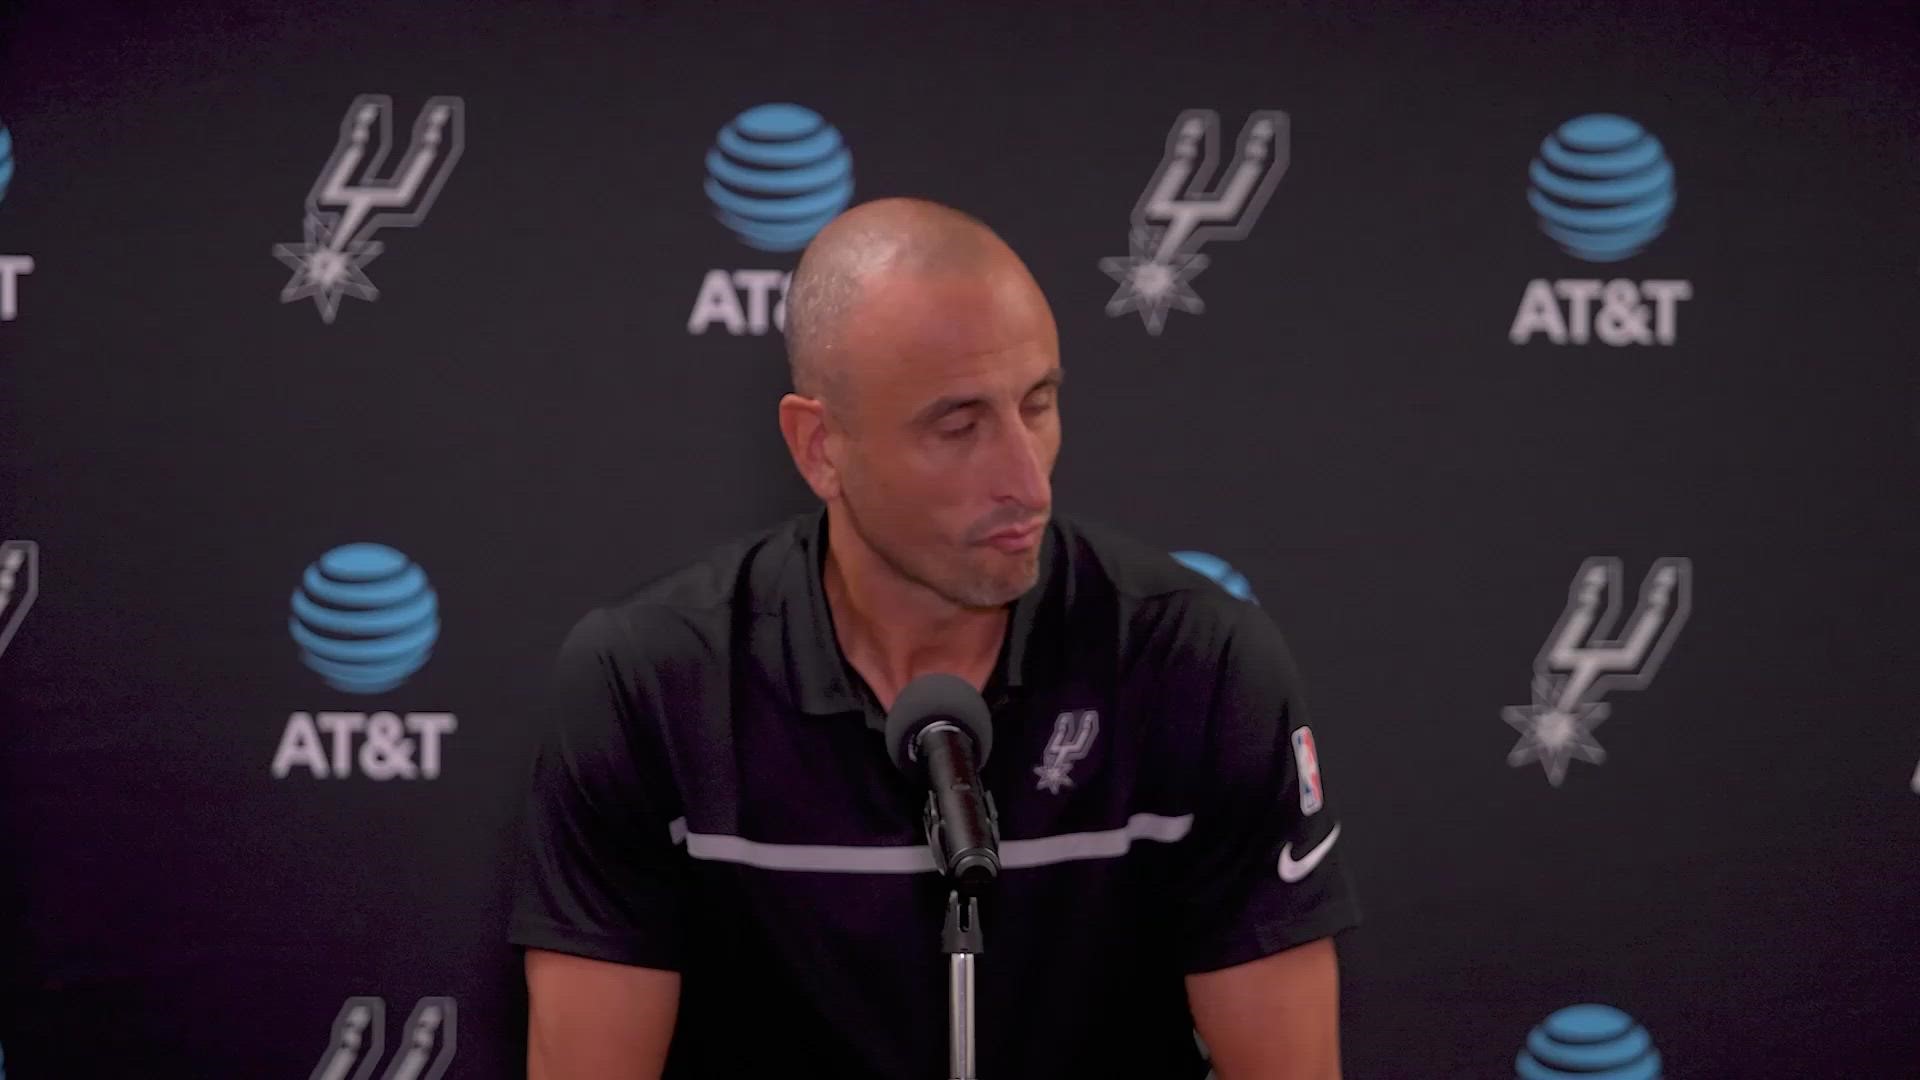 Ginobili said 2014 was therapeutic, and he still gets emotional watching highlights. He said 2005 was the most pressure, and when he started to feel he belonged.